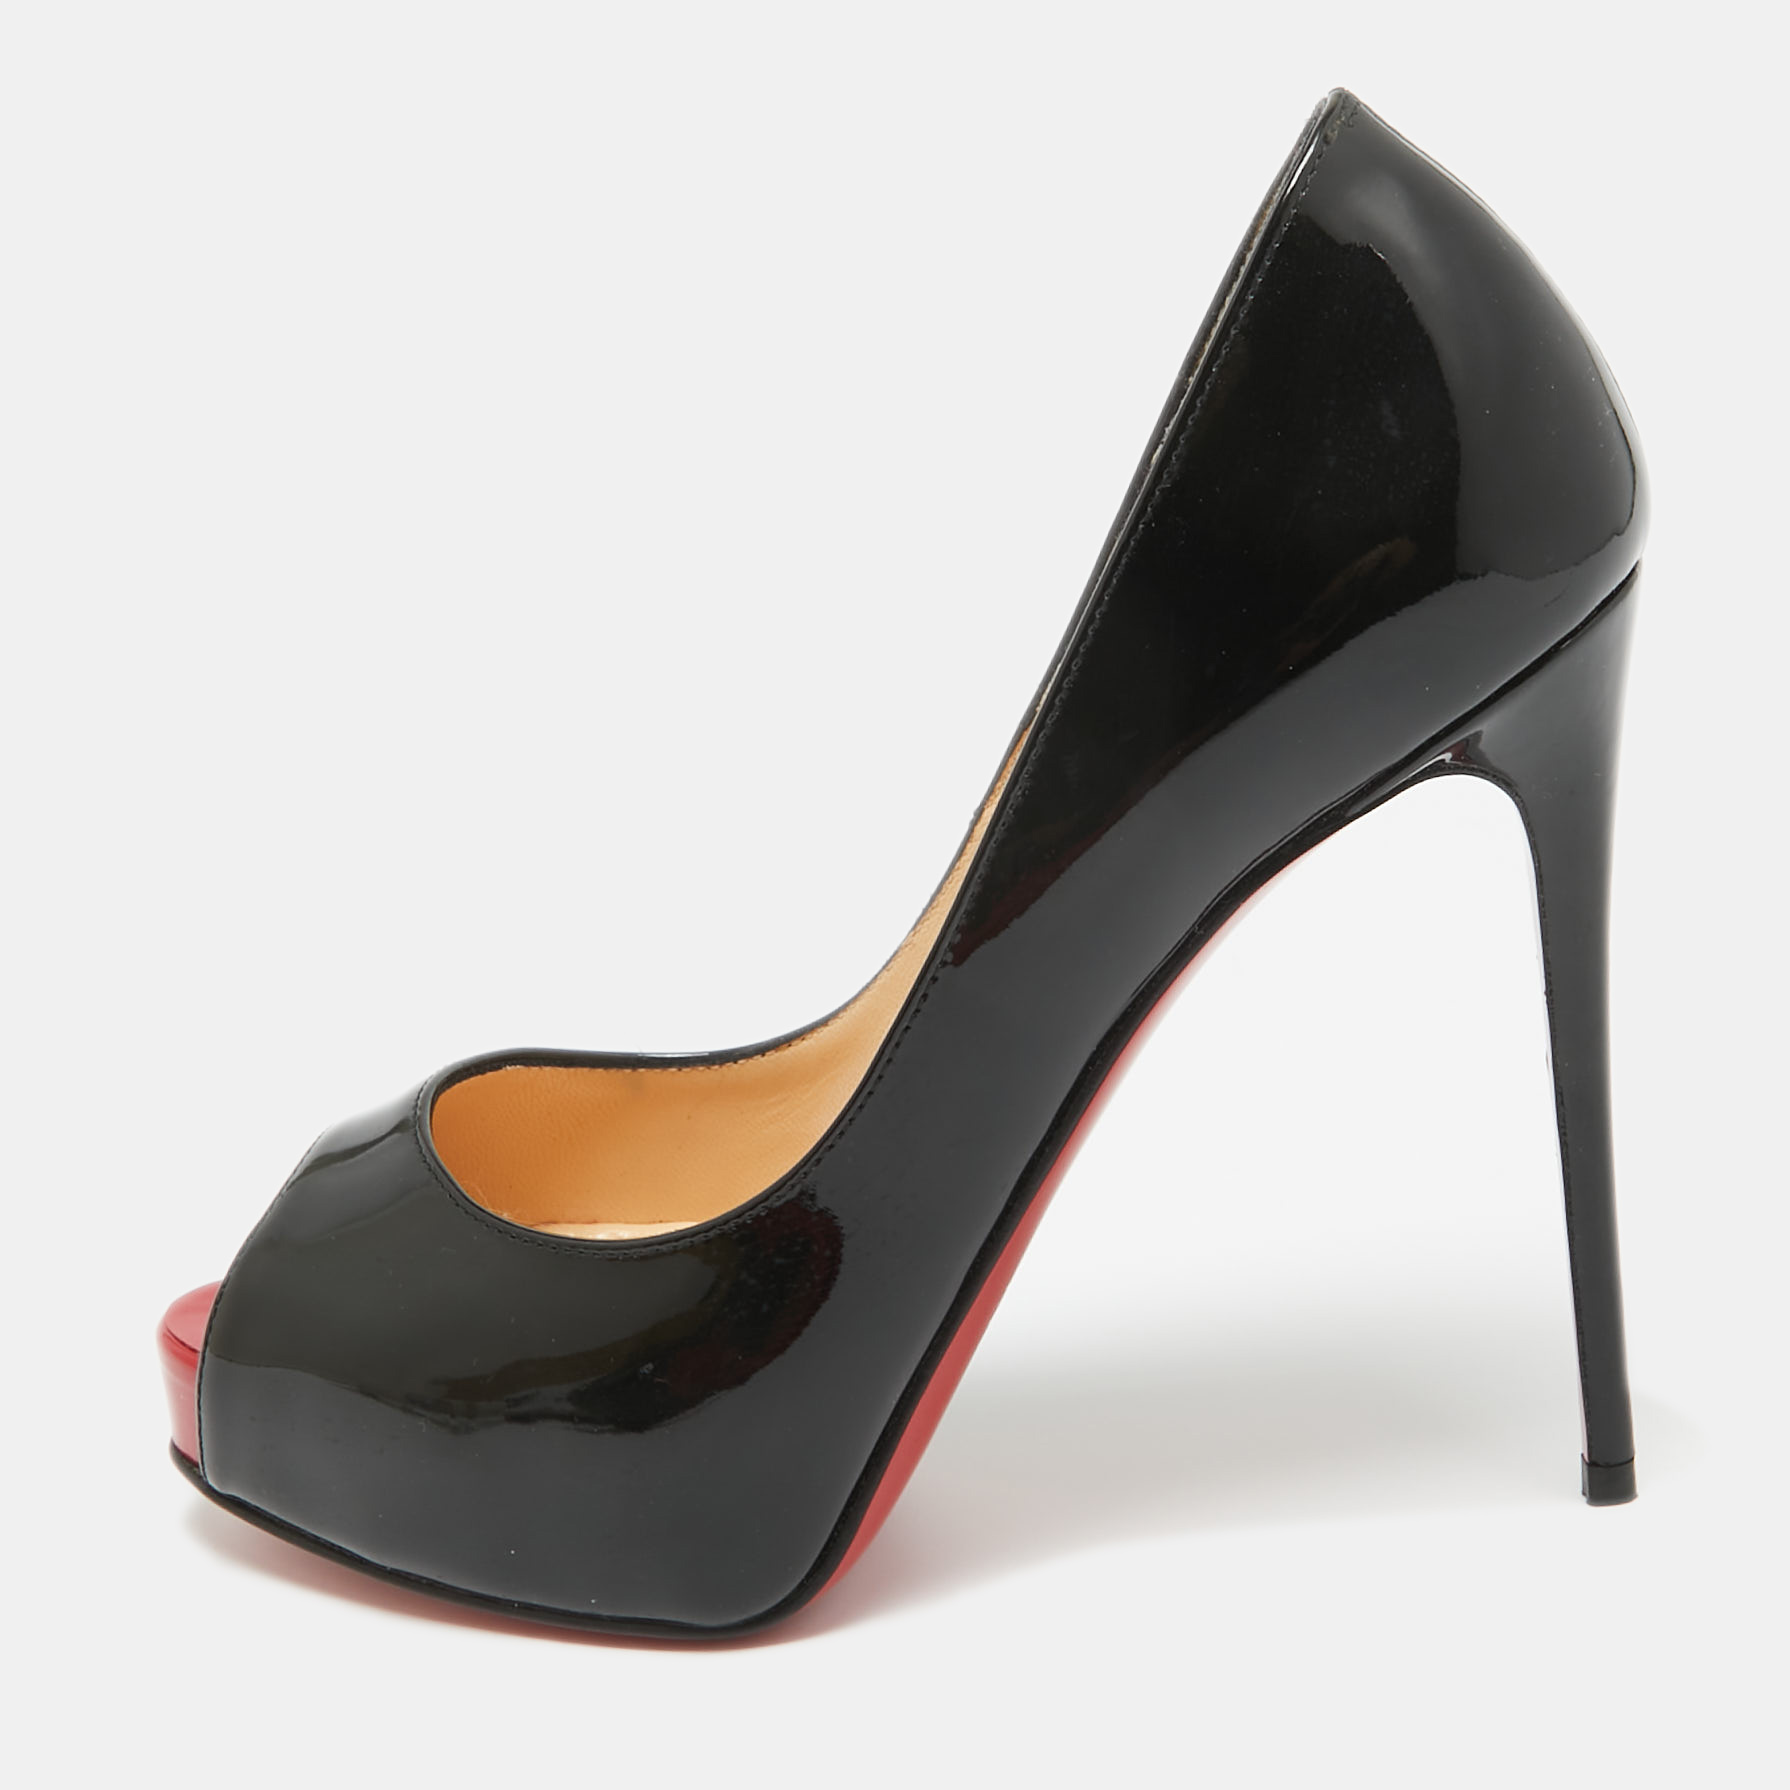 Christian louboutin black patent leather very prive pumps size 34